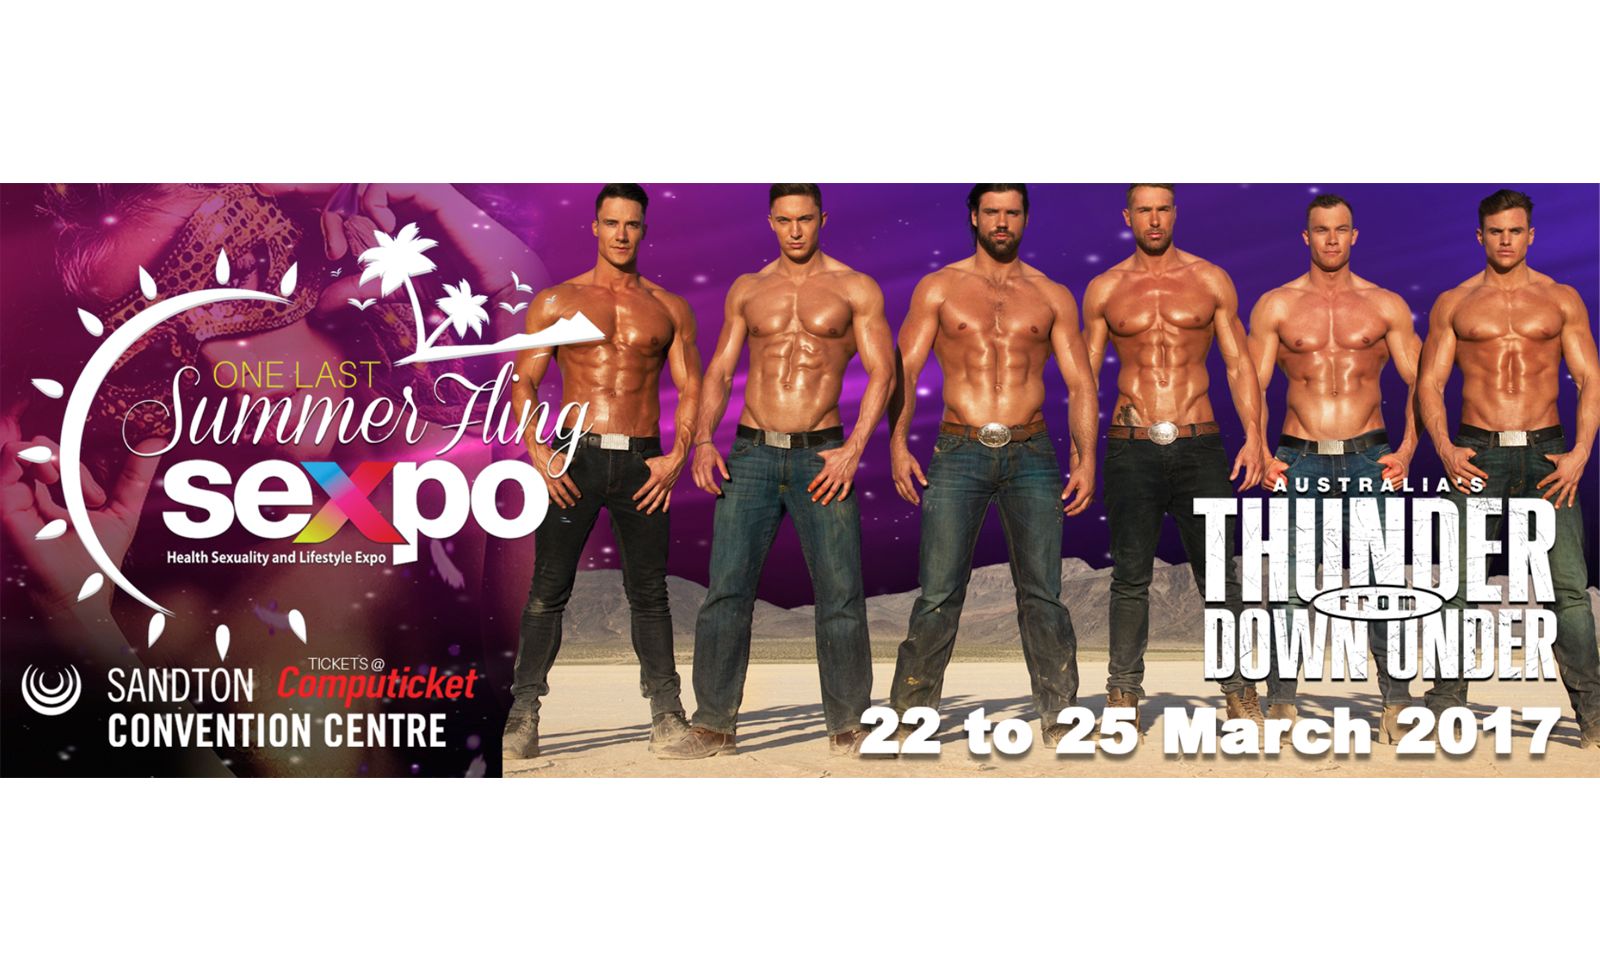 Sexpo to ‘Make Sex Great Again’: South Africa’s Sexiest Show Returning This Month